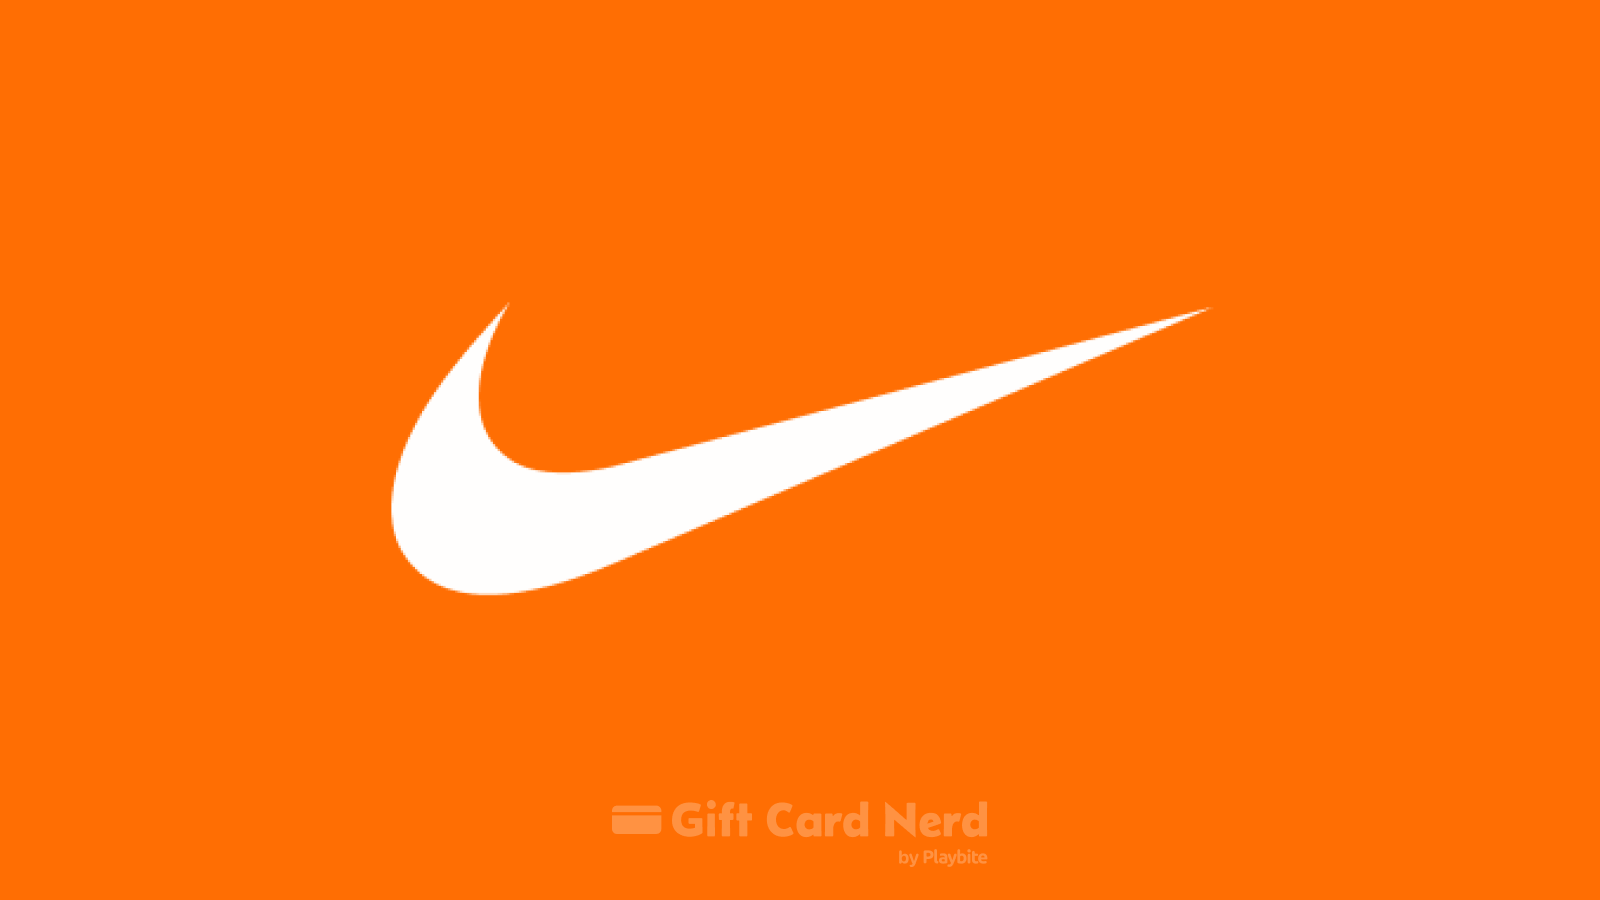 Does Target Sell Nike Gift Cards?